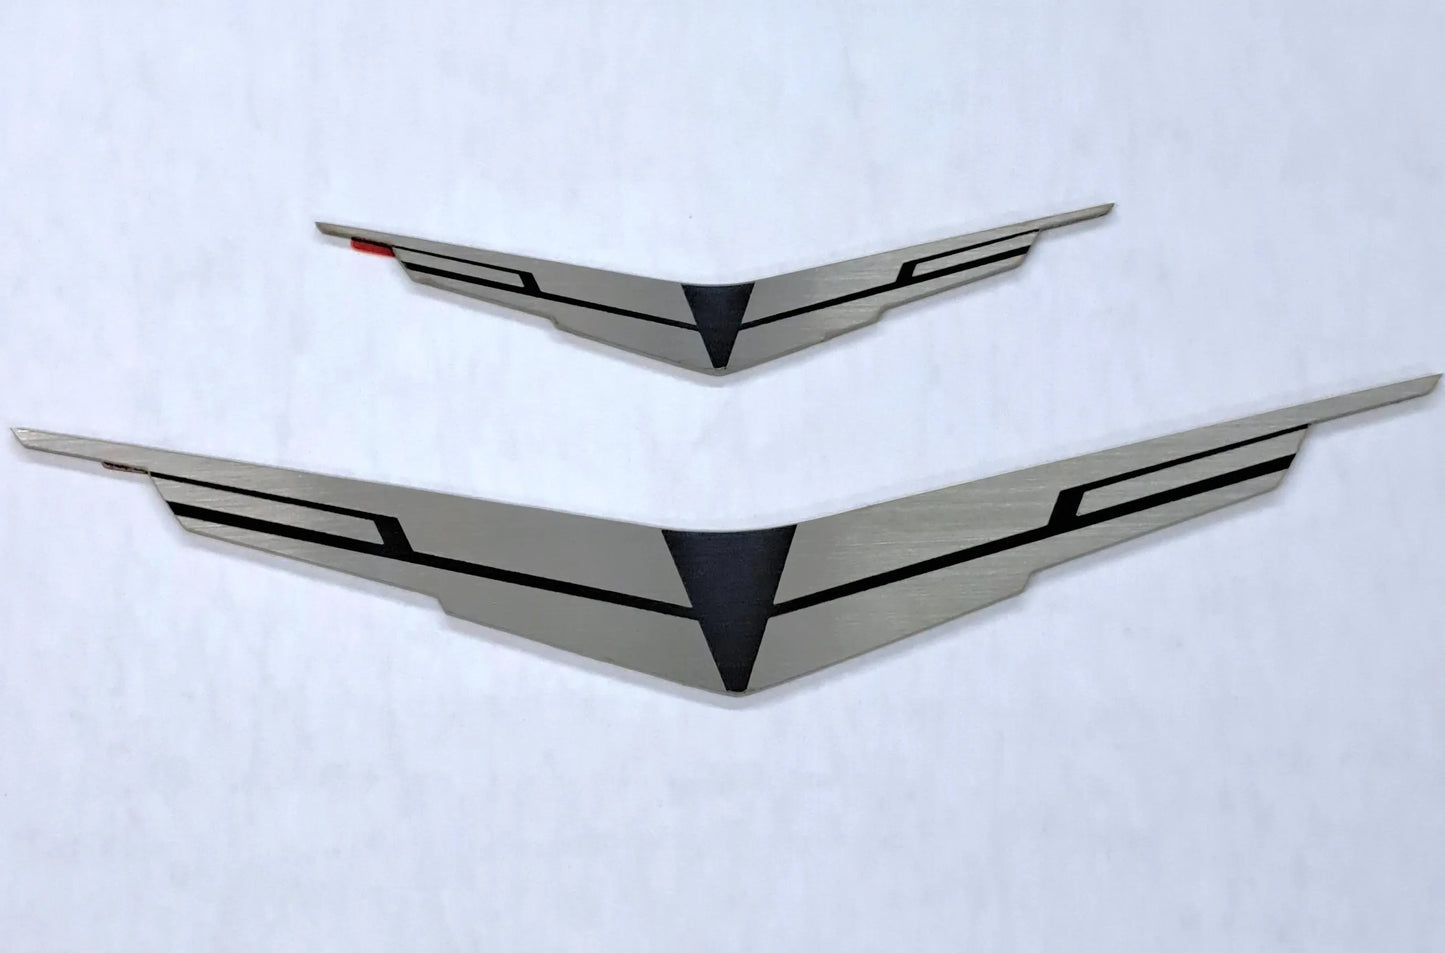 Cadillac Blackwing Logo Stainless Steel Badges